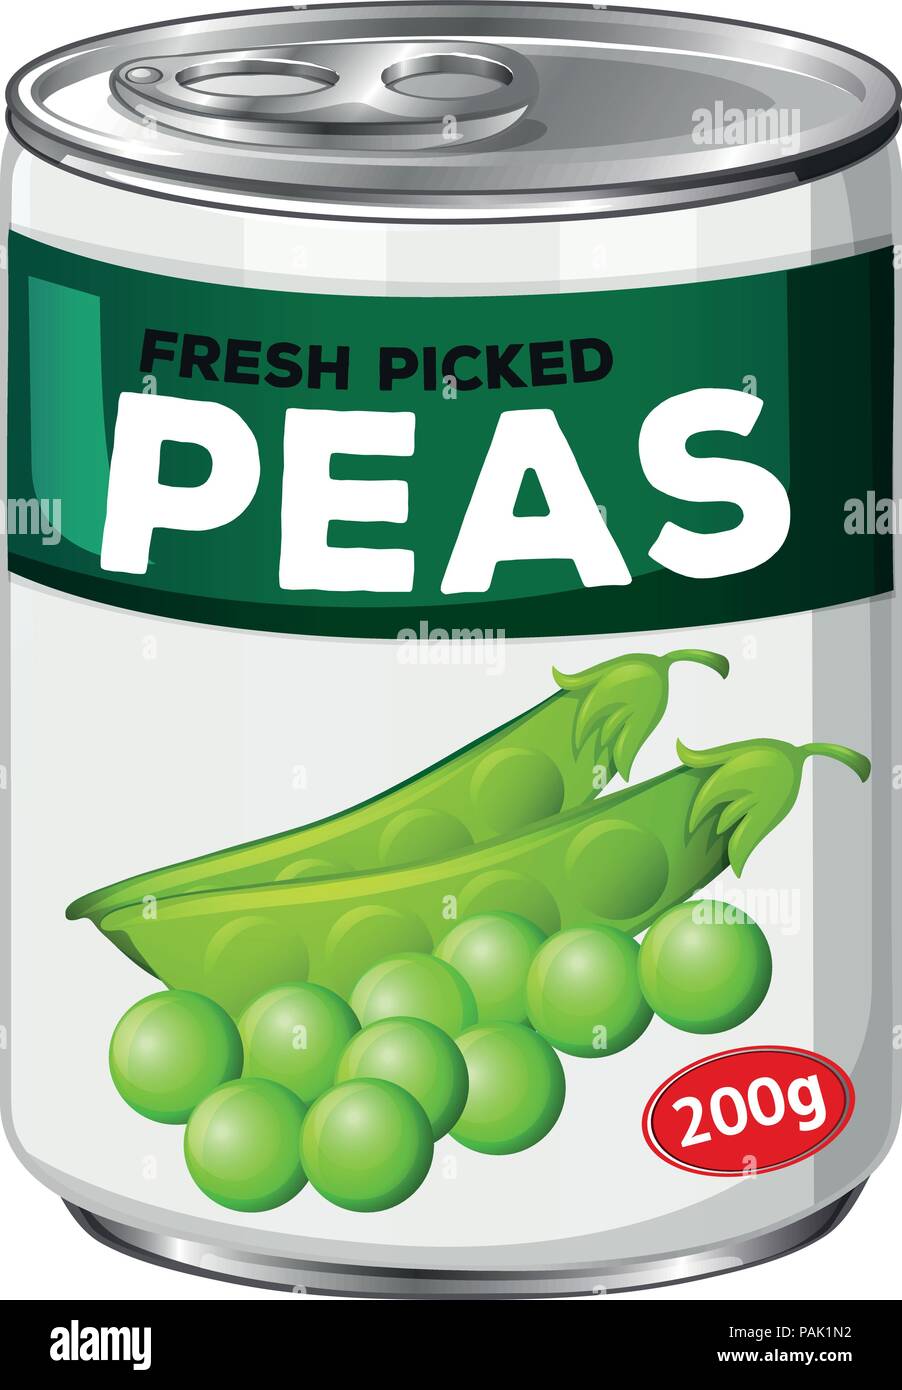 Can of fresh picked peas illustration Stock Vector